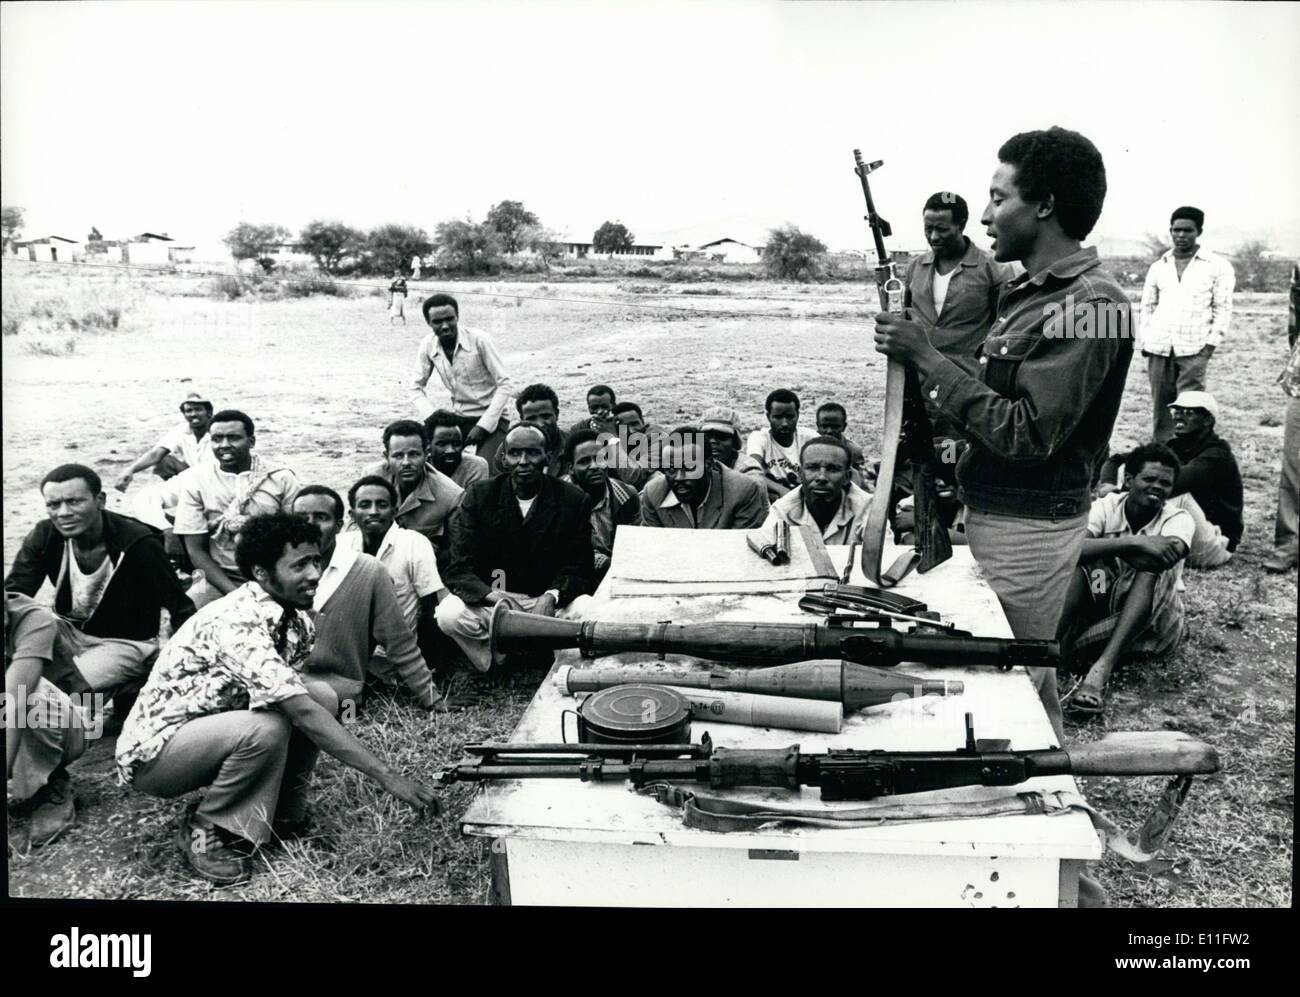 Nov. 11, 1977 - Jijiga: now in Somali hands: A military training camp for the Western Somali Liberation Front recruits on the outskirts of Jijiga. In this camp 400 new recruits are training in use of various small arms and anti-tack rockets. Stock Photo